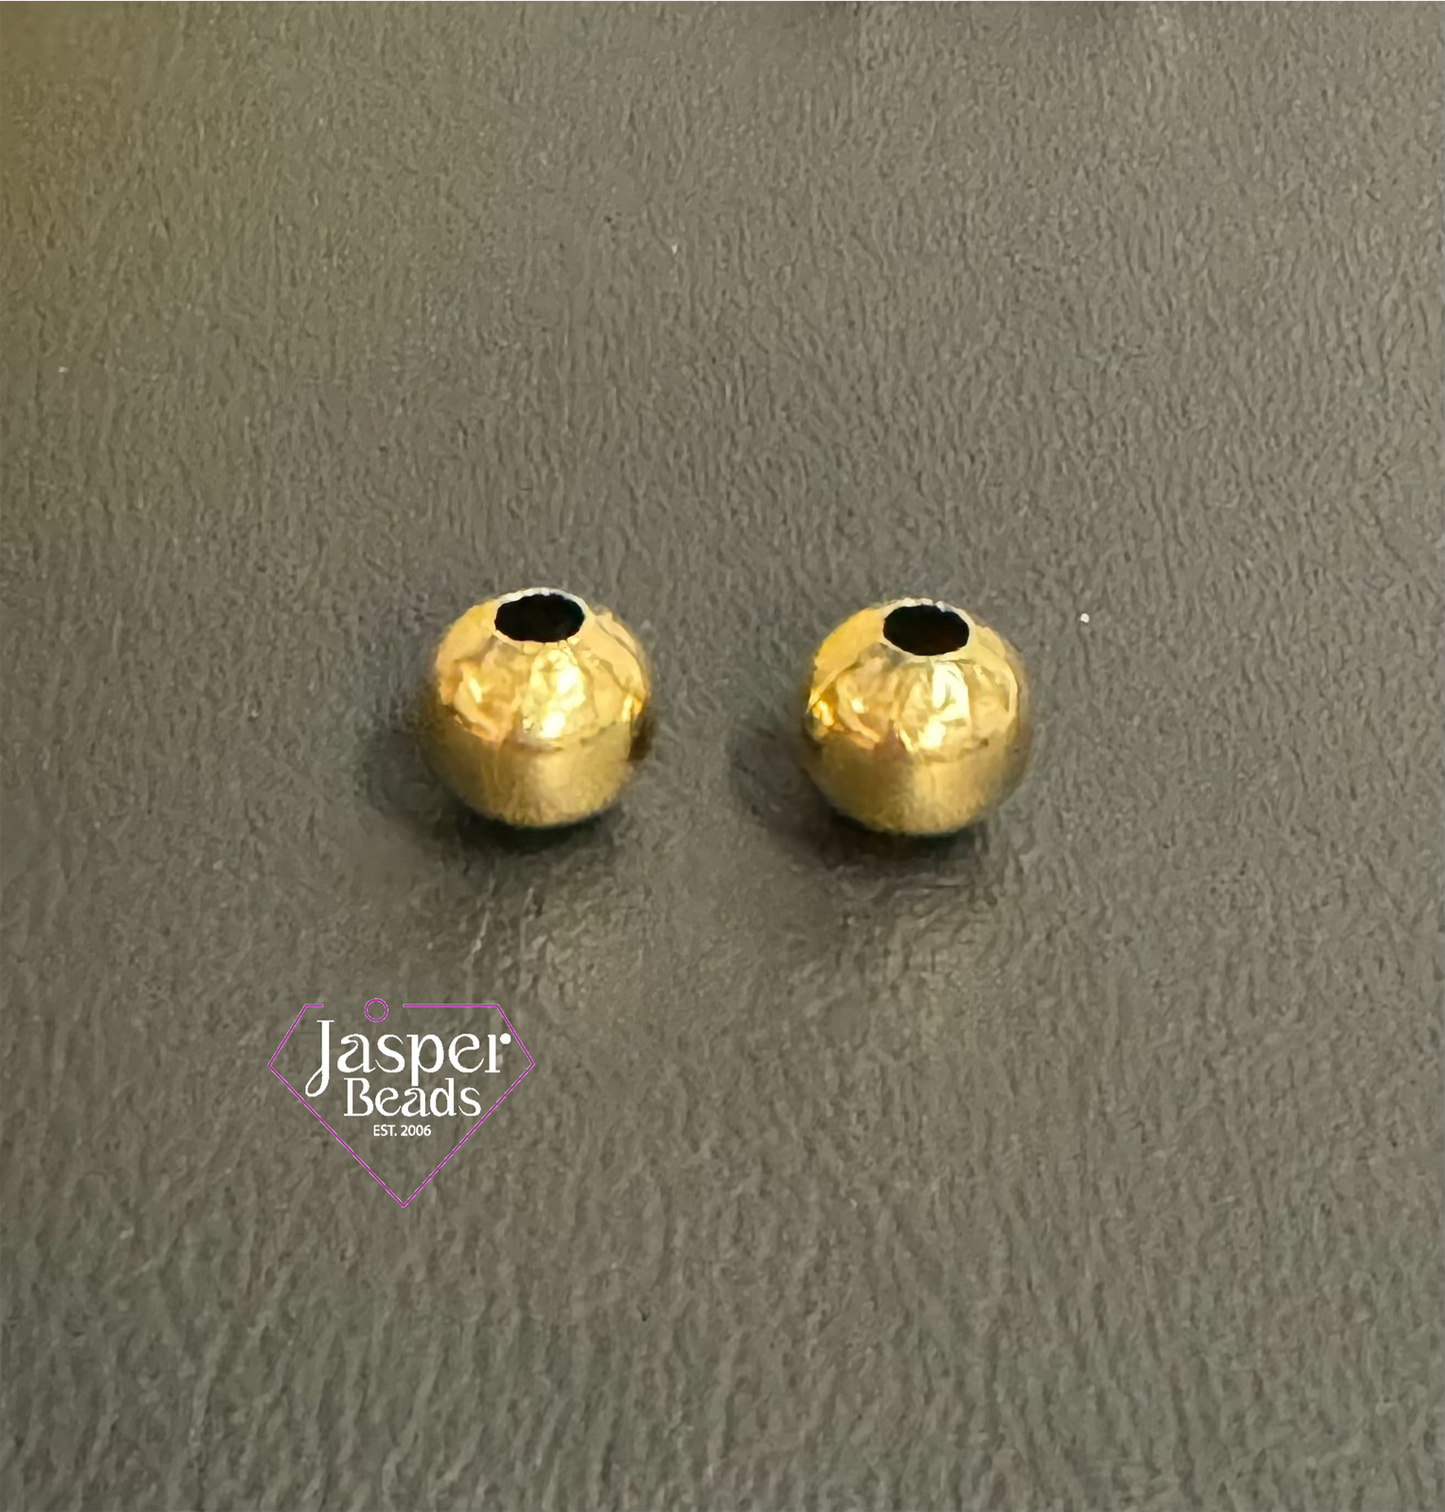 Stainless Steel Round Bead Spacer